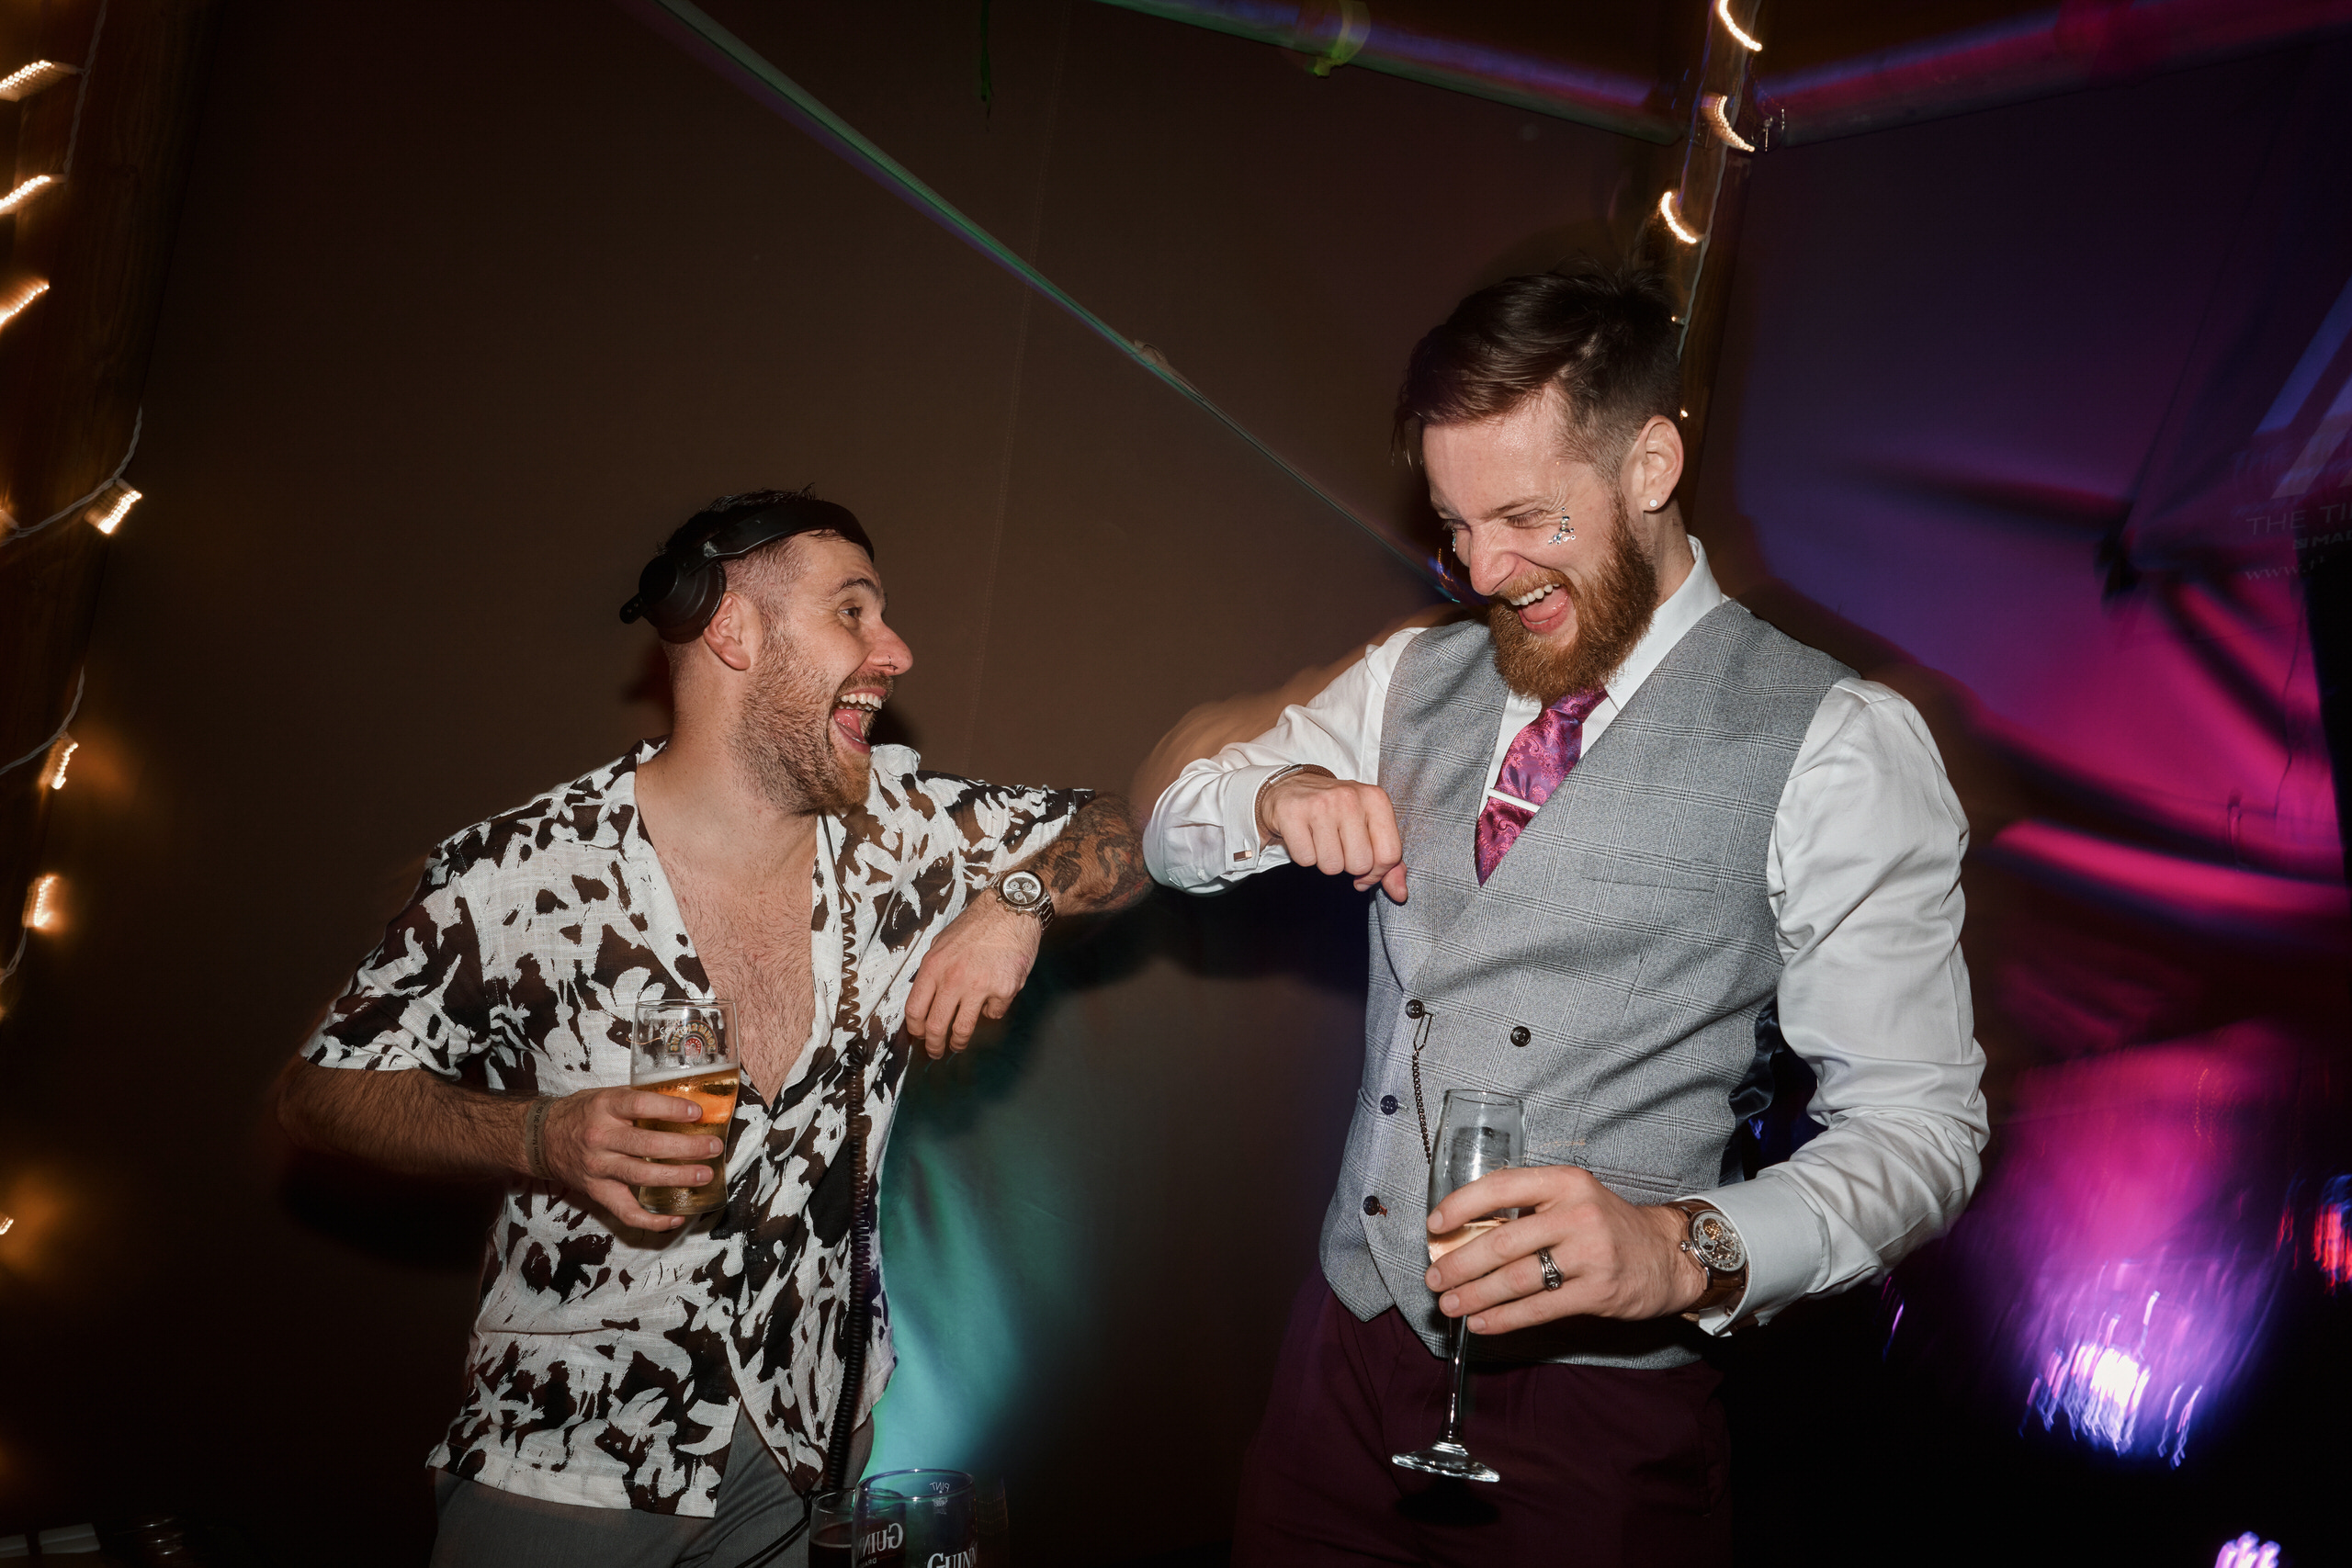 Two guys cracking up at a party inside a tent.